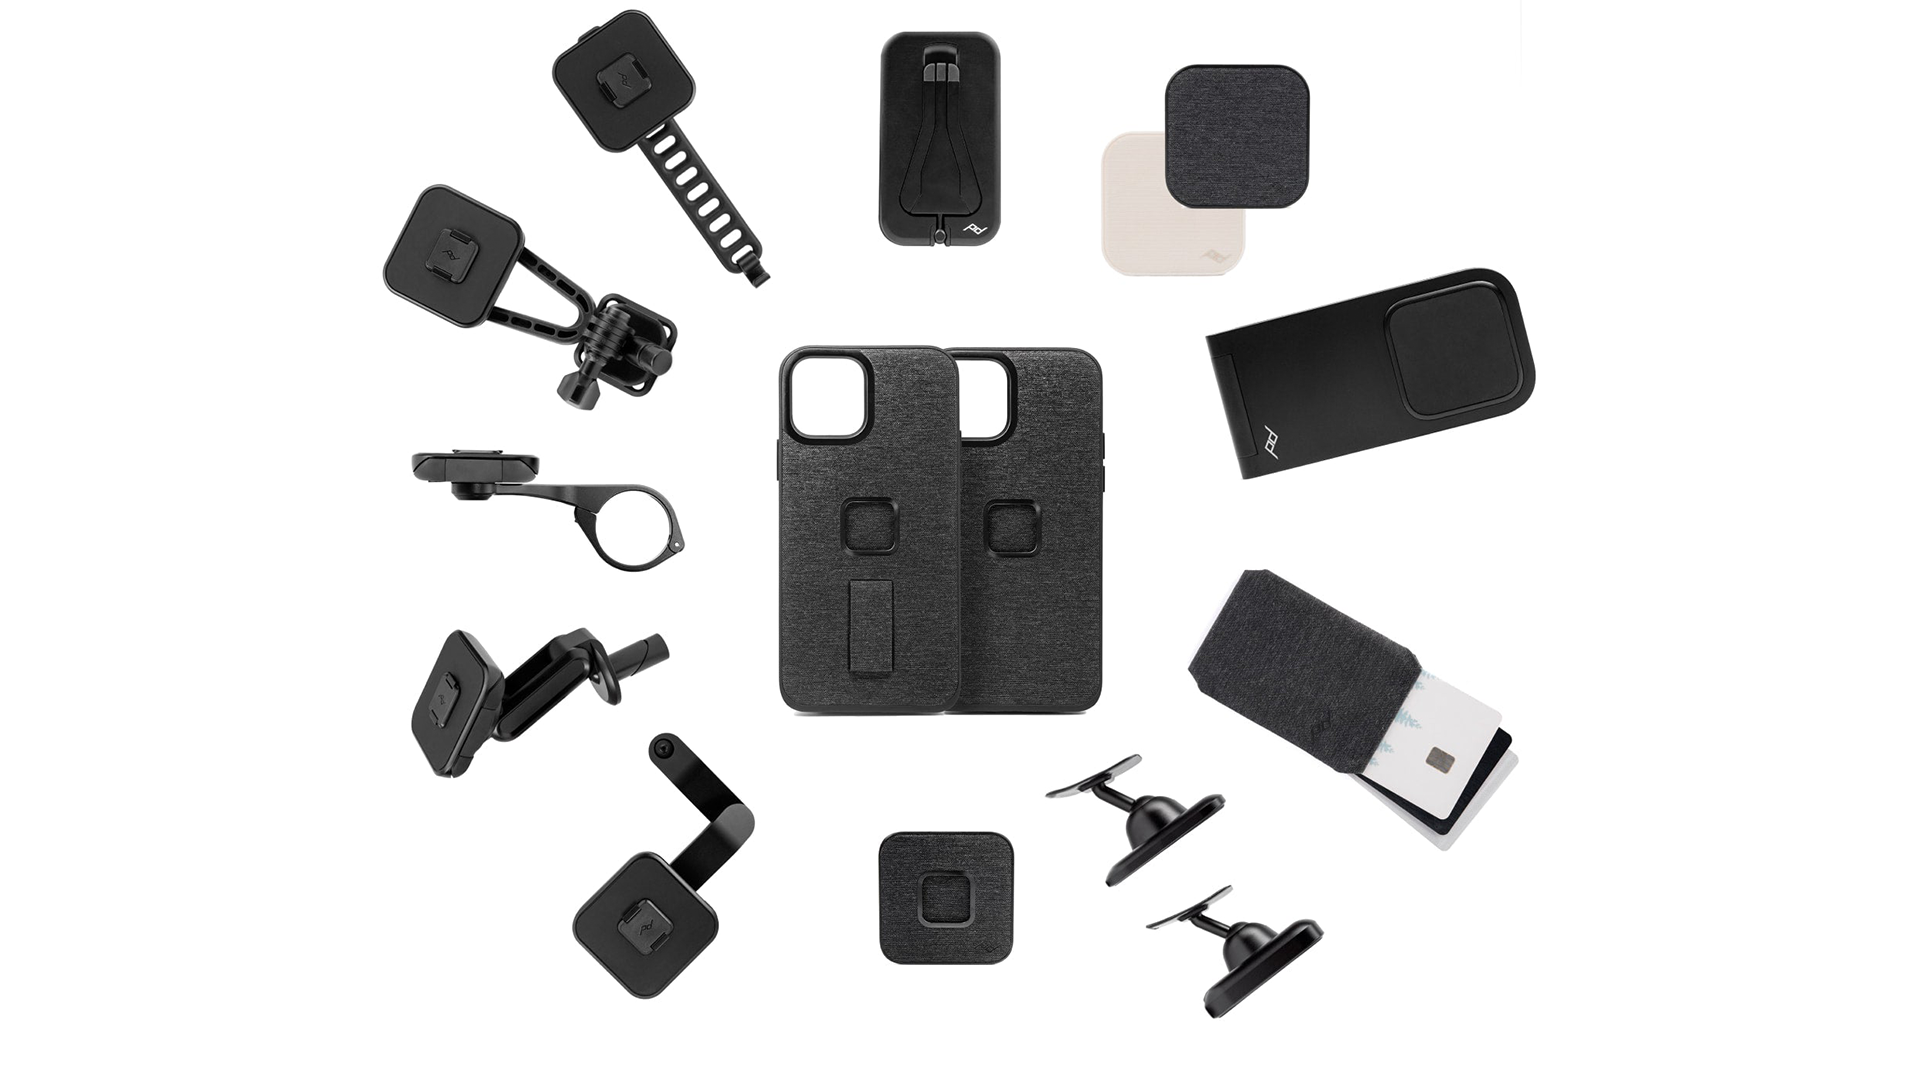 Mobile by Peak Design cases and accessories